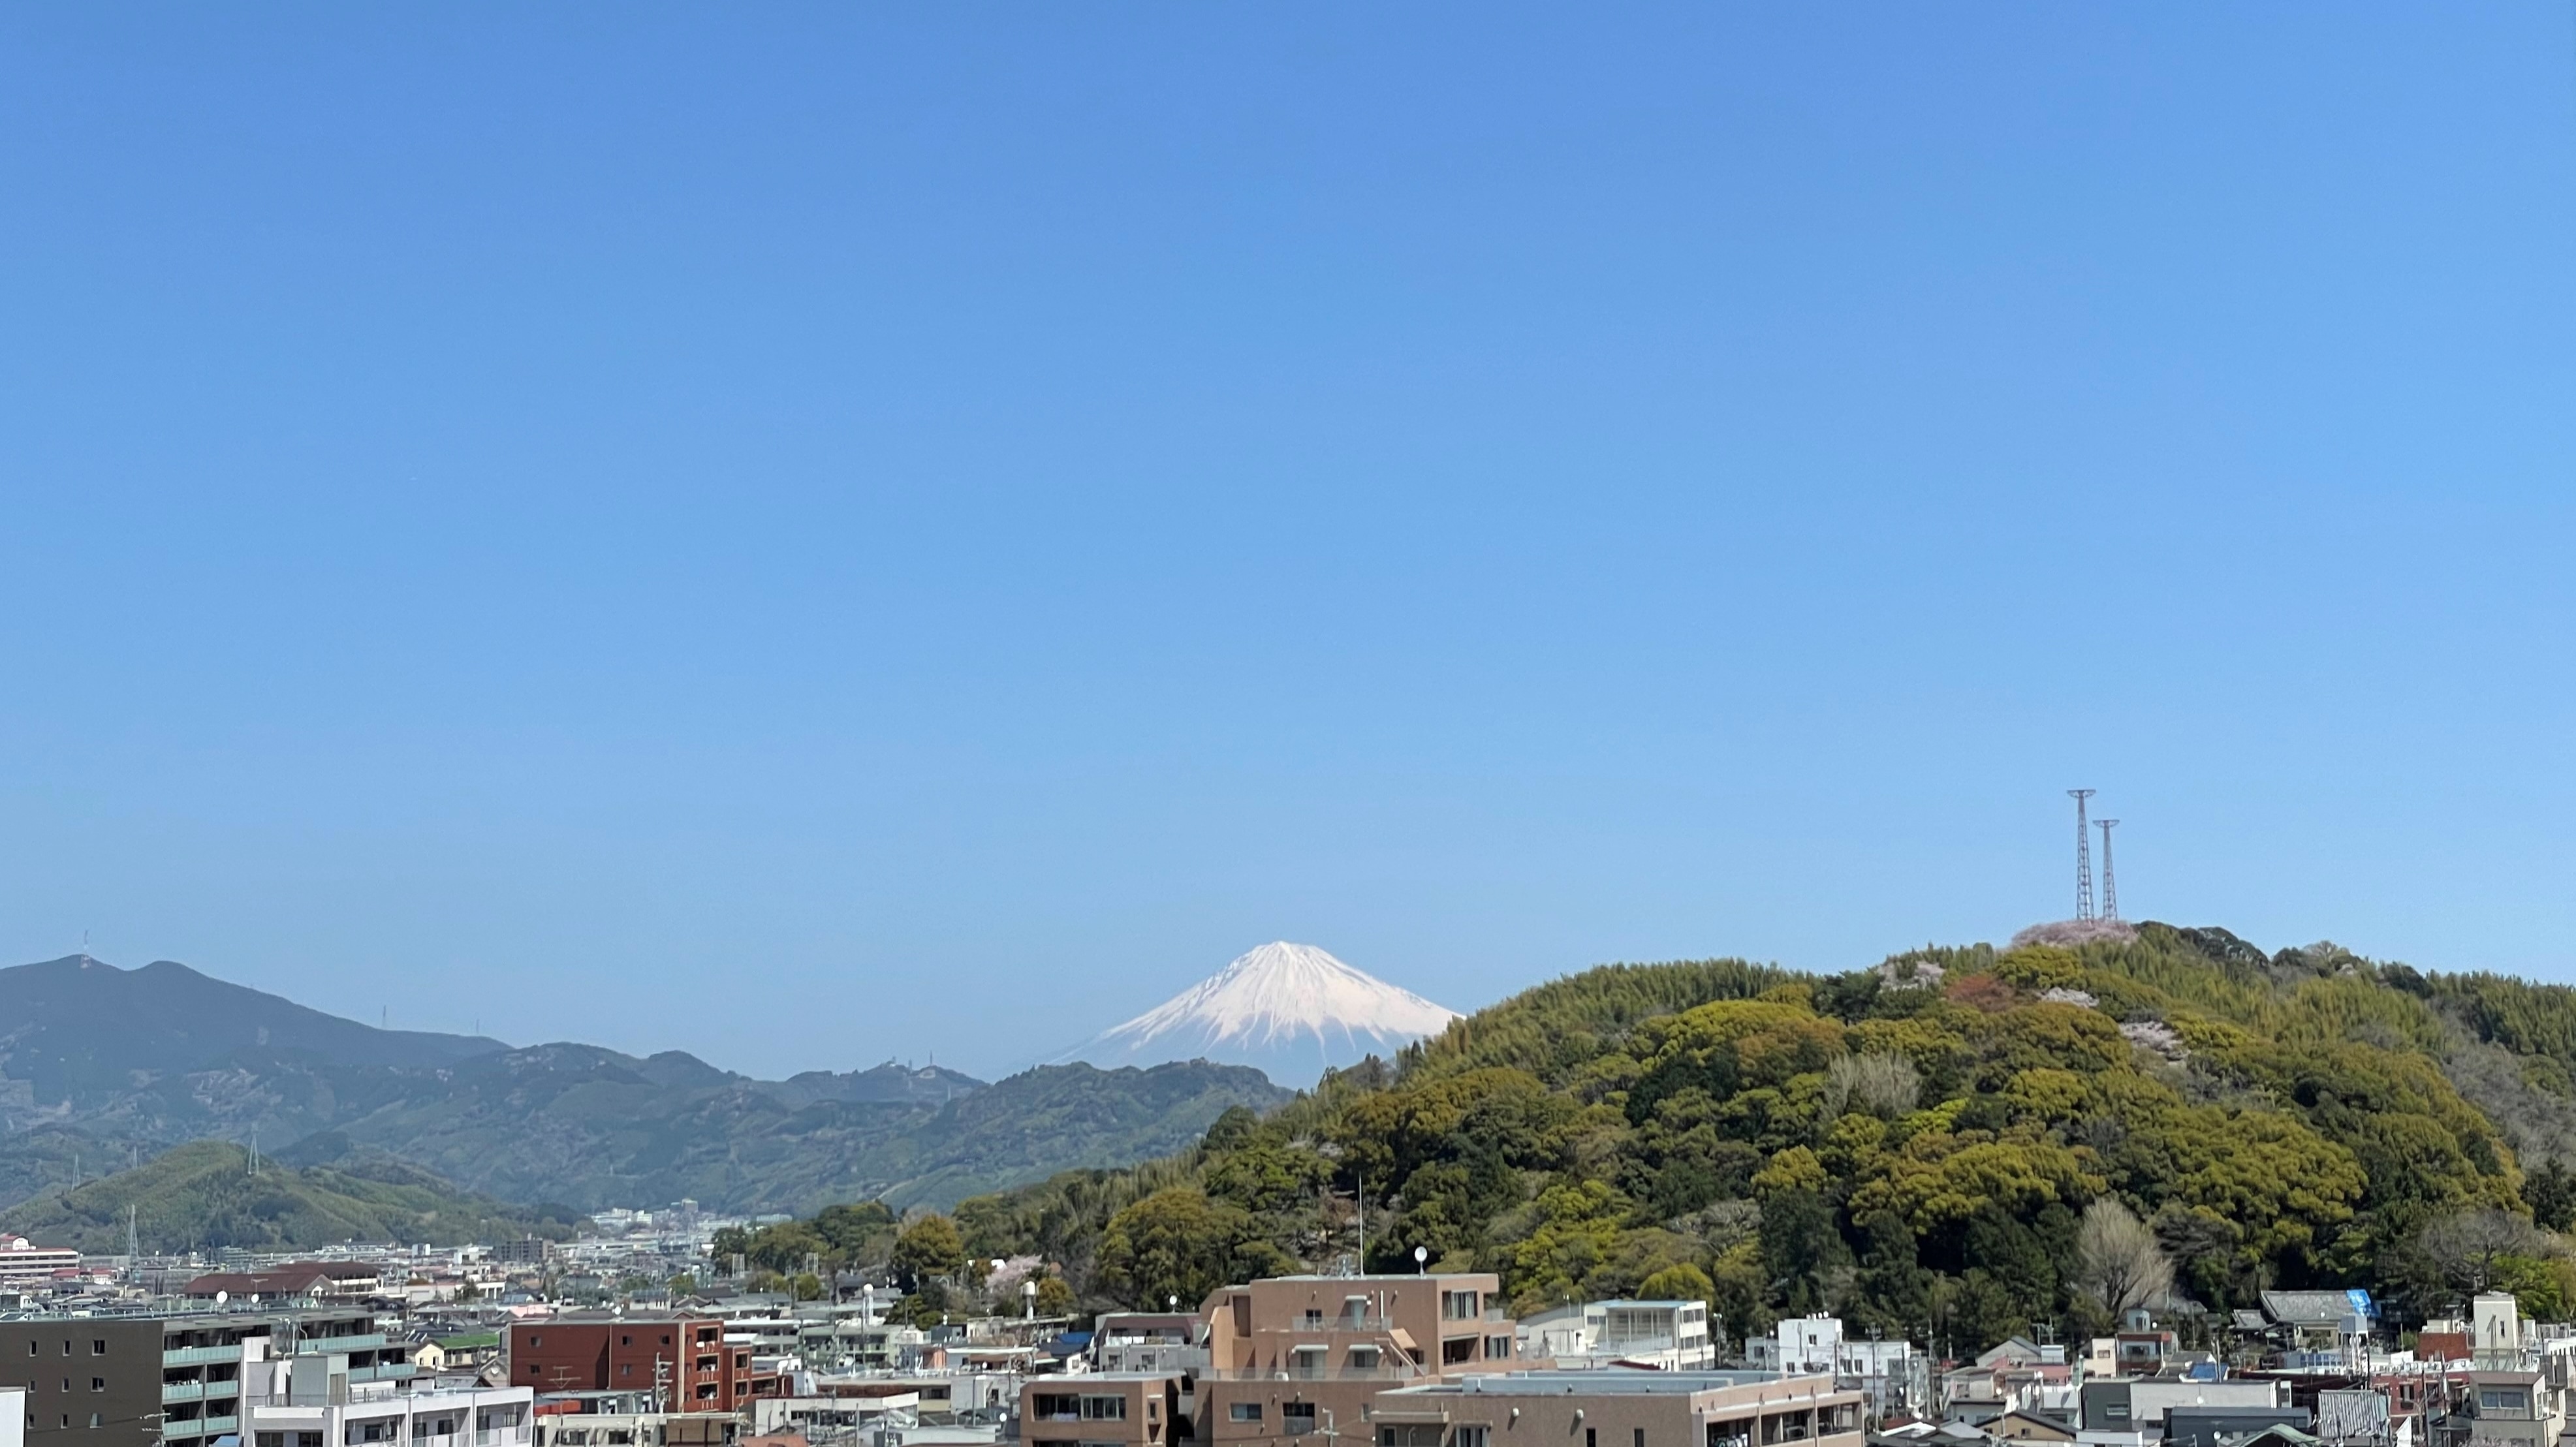 [Mt. Fuji side] The view from the guest room, Mt. Fuji can be seen on a clear air day